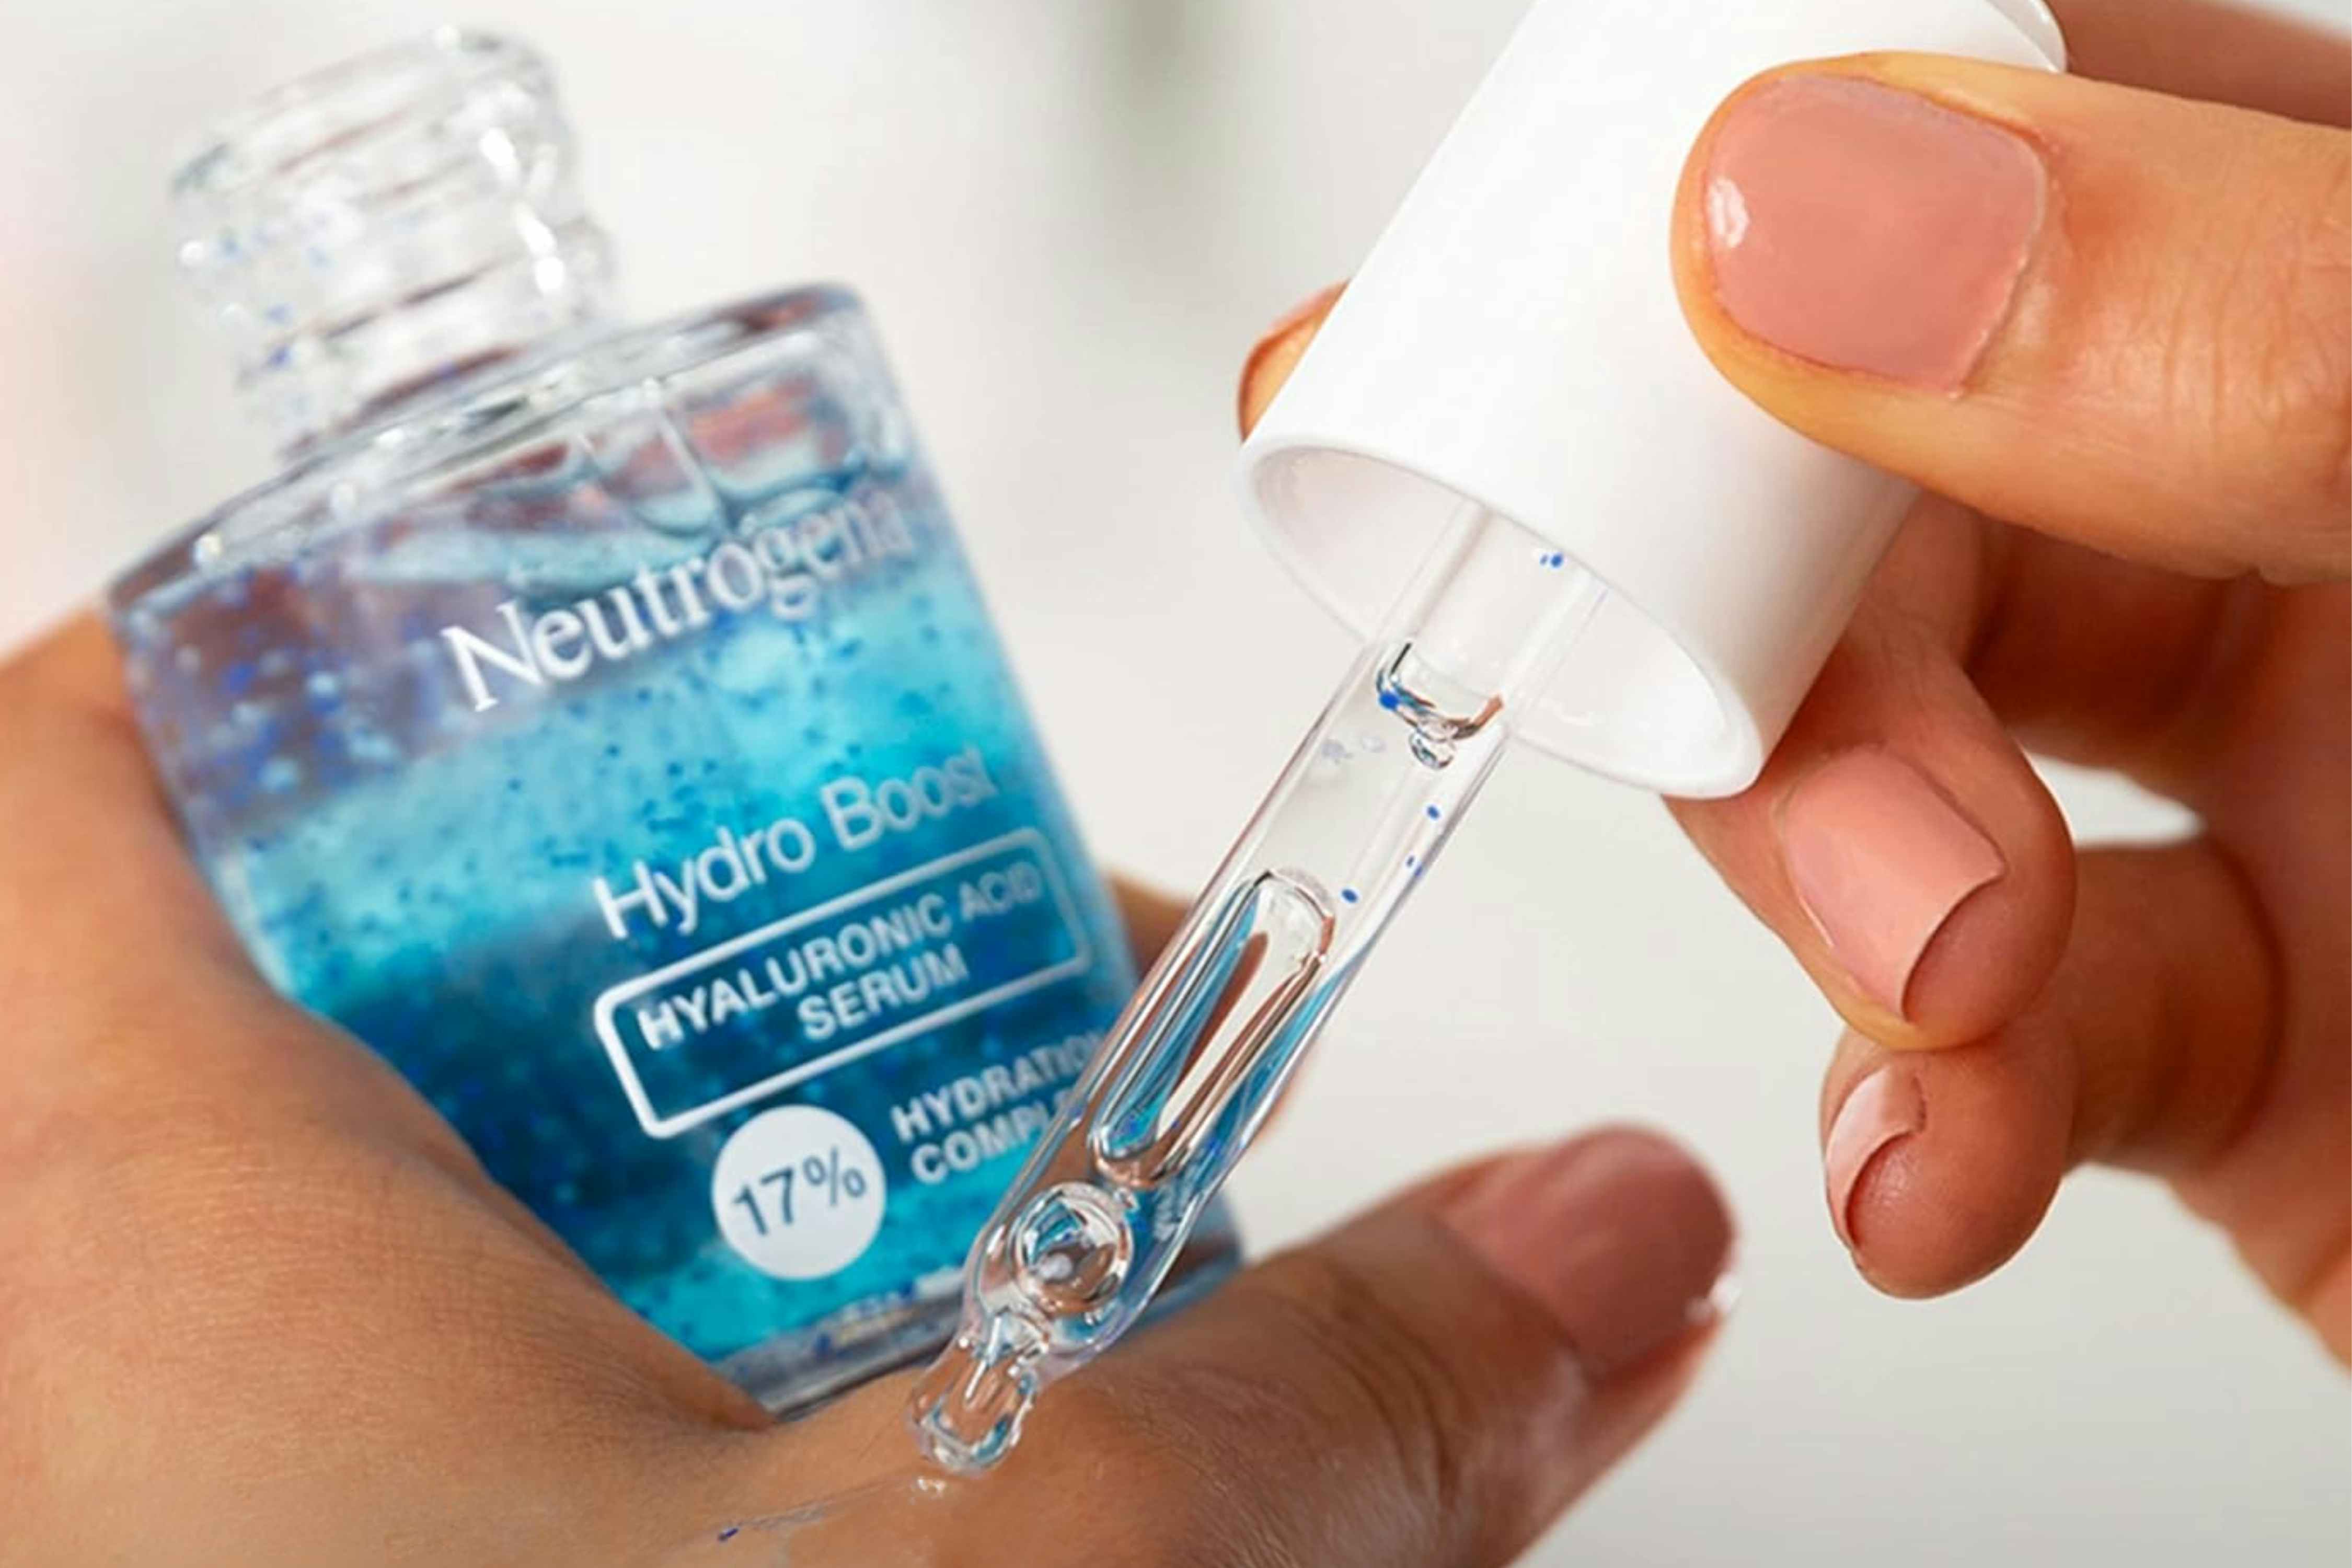 You Can Get Neutrogena Hydro Boost Serum for as Low as $8 at Amazon